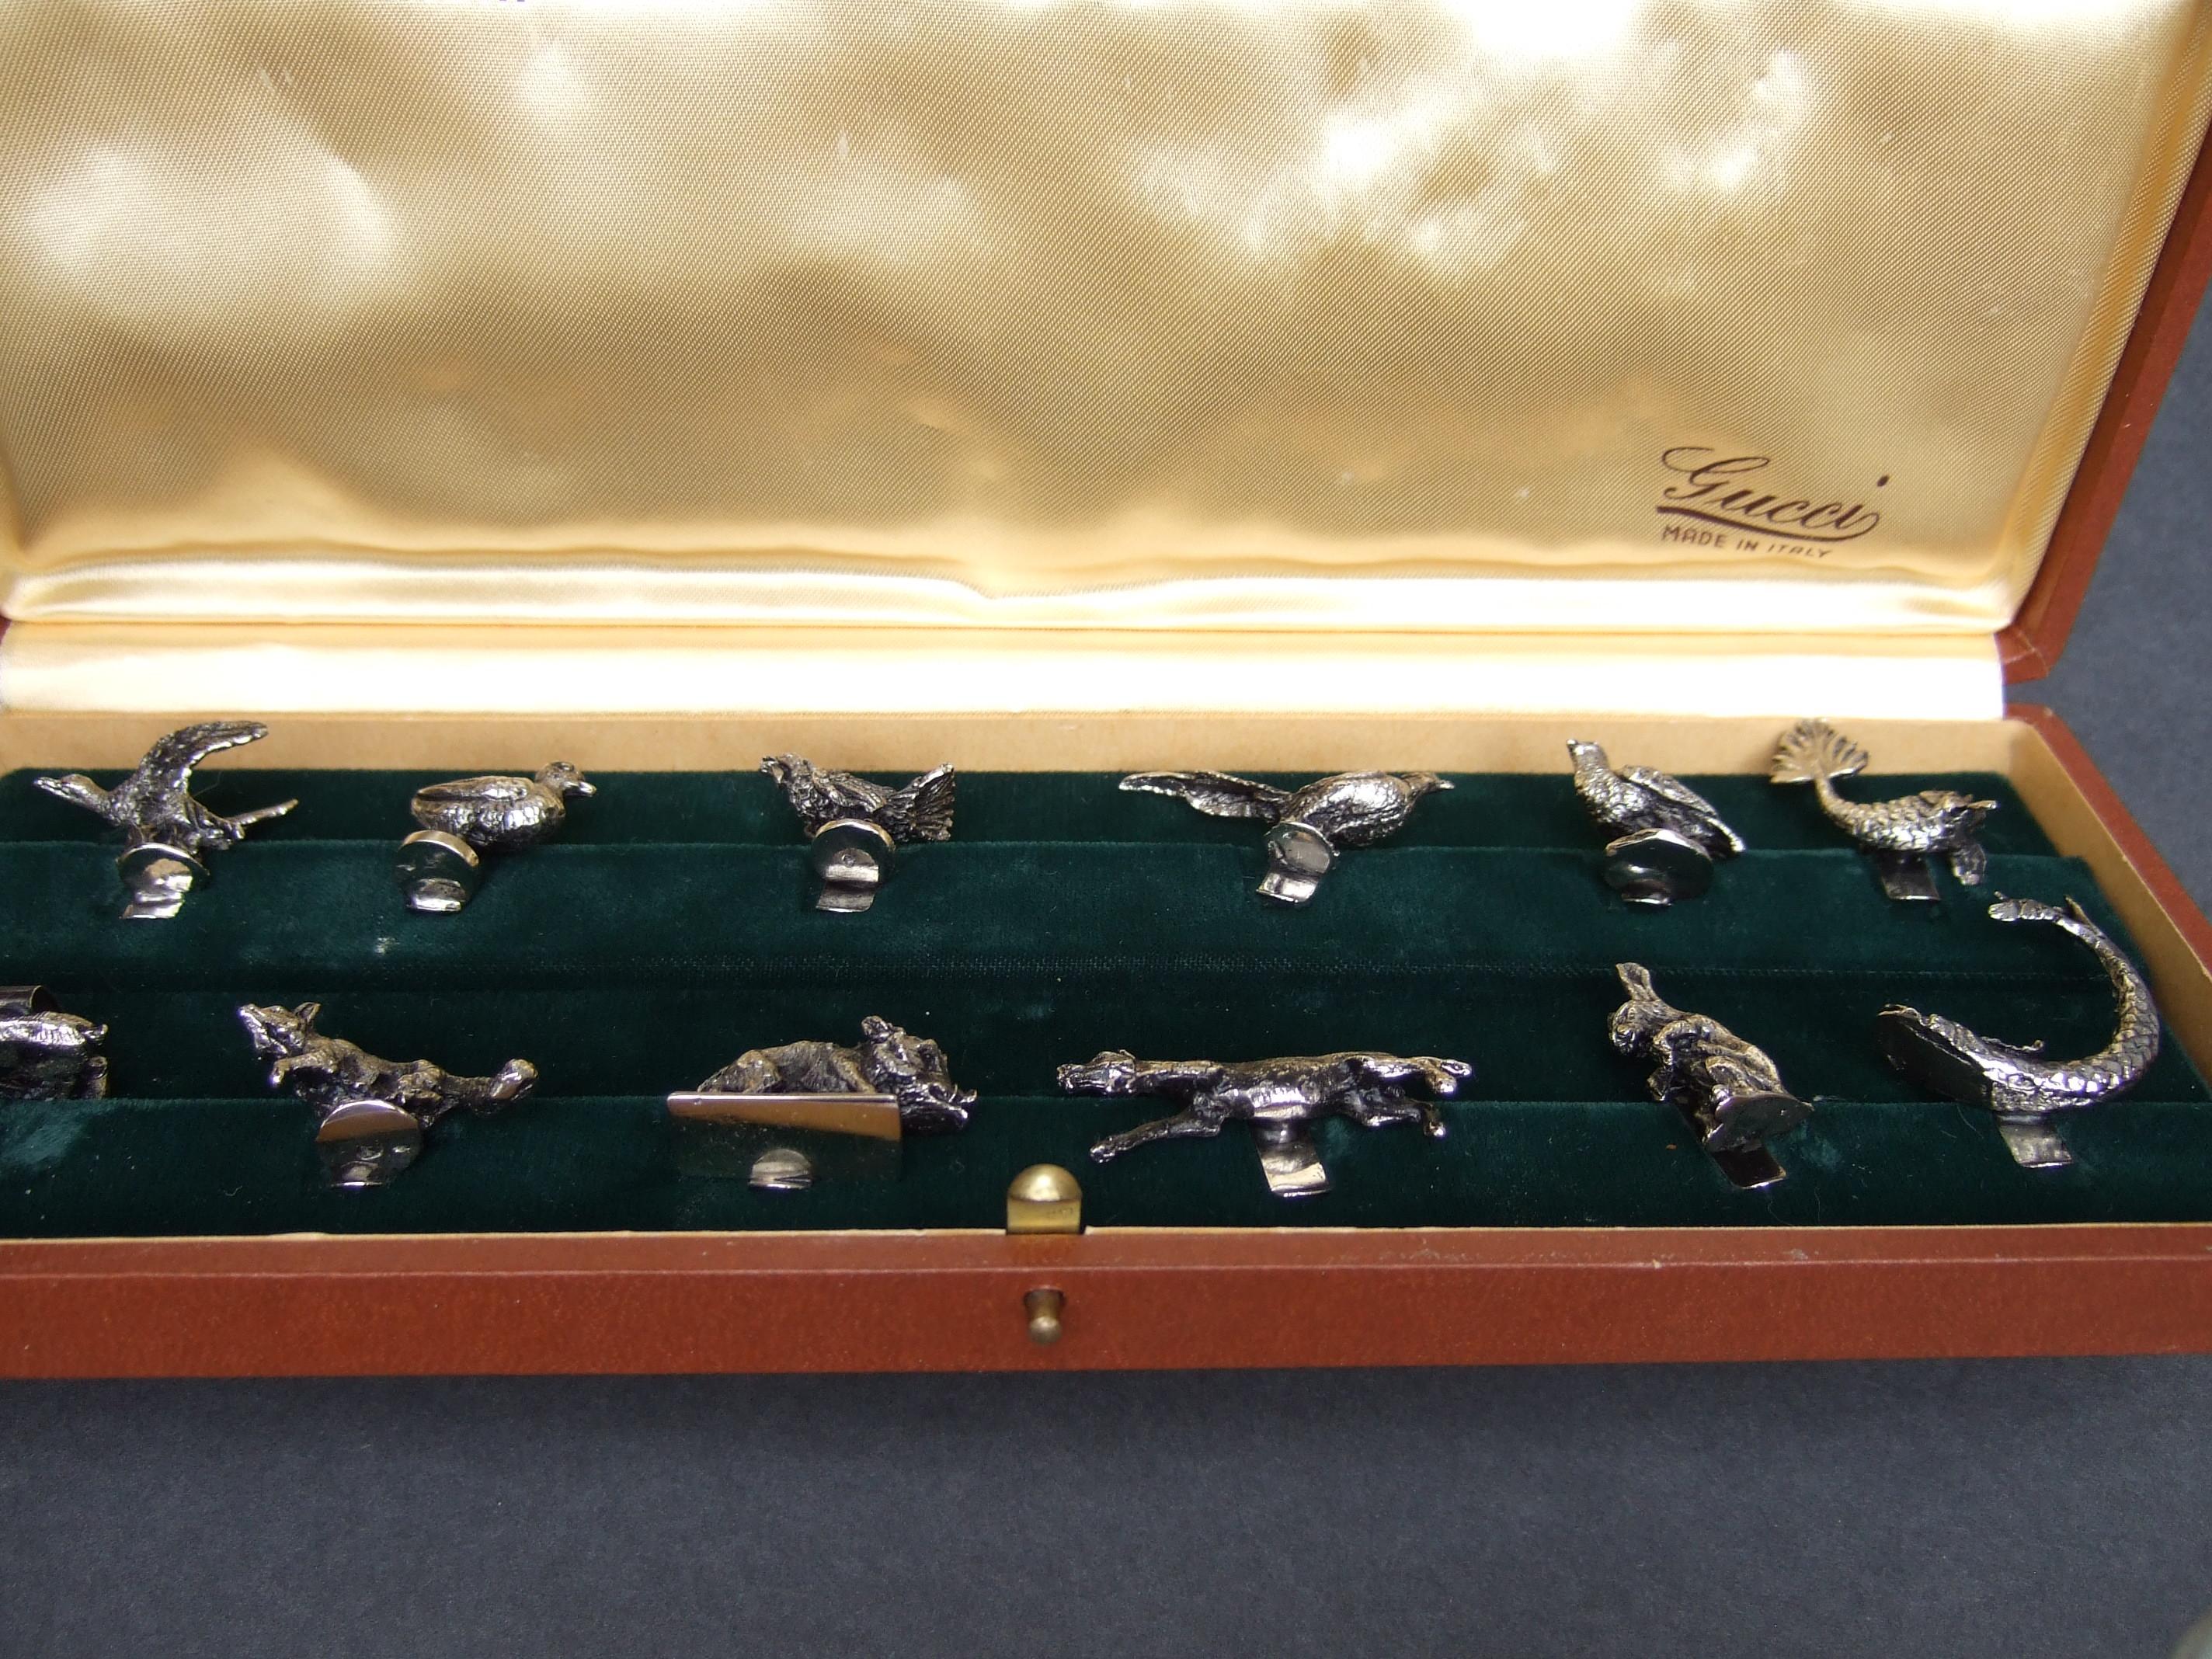 Gucci Italy Elegant Silver Animal Menagerie of Place Card Holders in Gucci Box  9